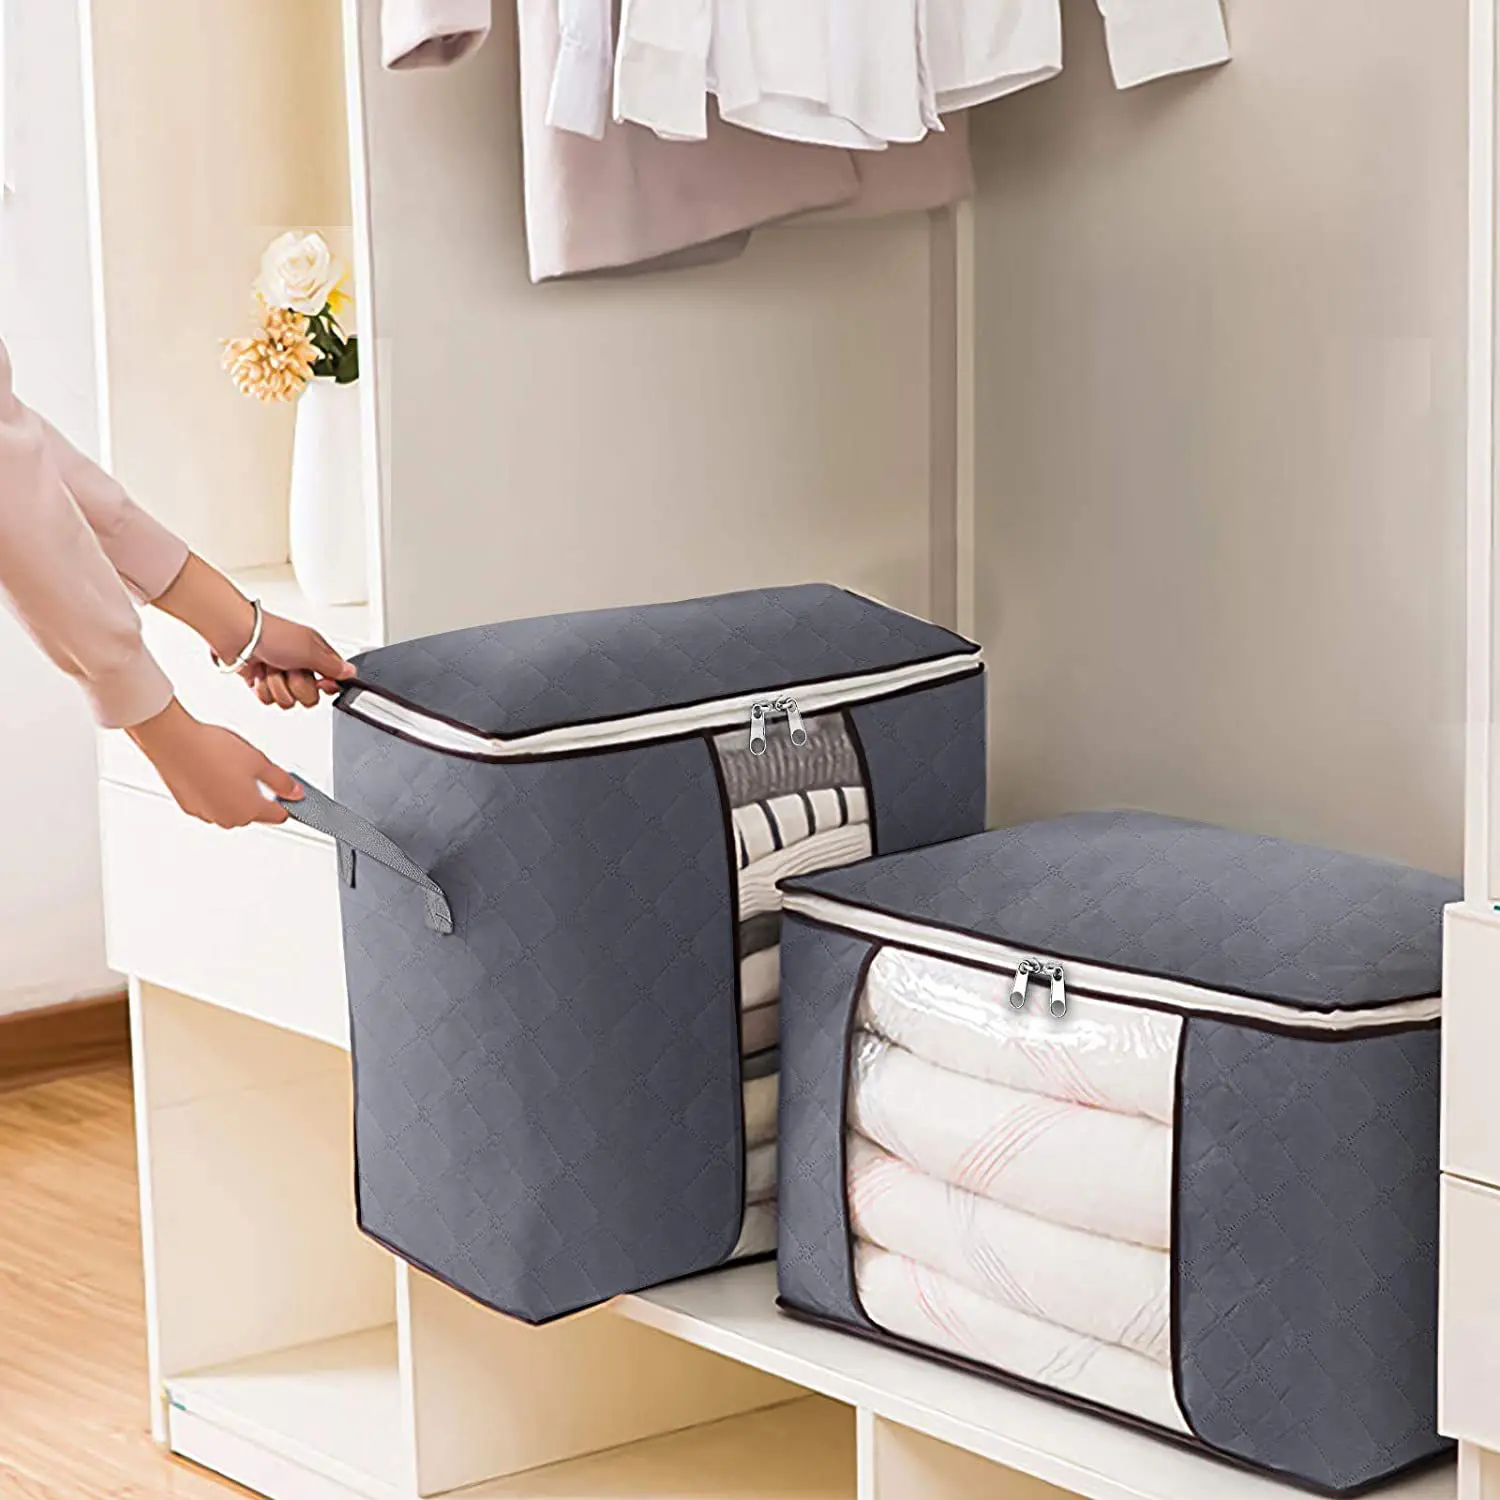 https://ae01.alicdn.com/kf/Ade723a05ba09430d930a64c30c8f7ecer/3pcs-Clothes-Quilts-Storage-Bag-90L-Large-Capacity-Organizer-Foldable-Blanket-Storage-Bags-Storage-Containers-for.jpg